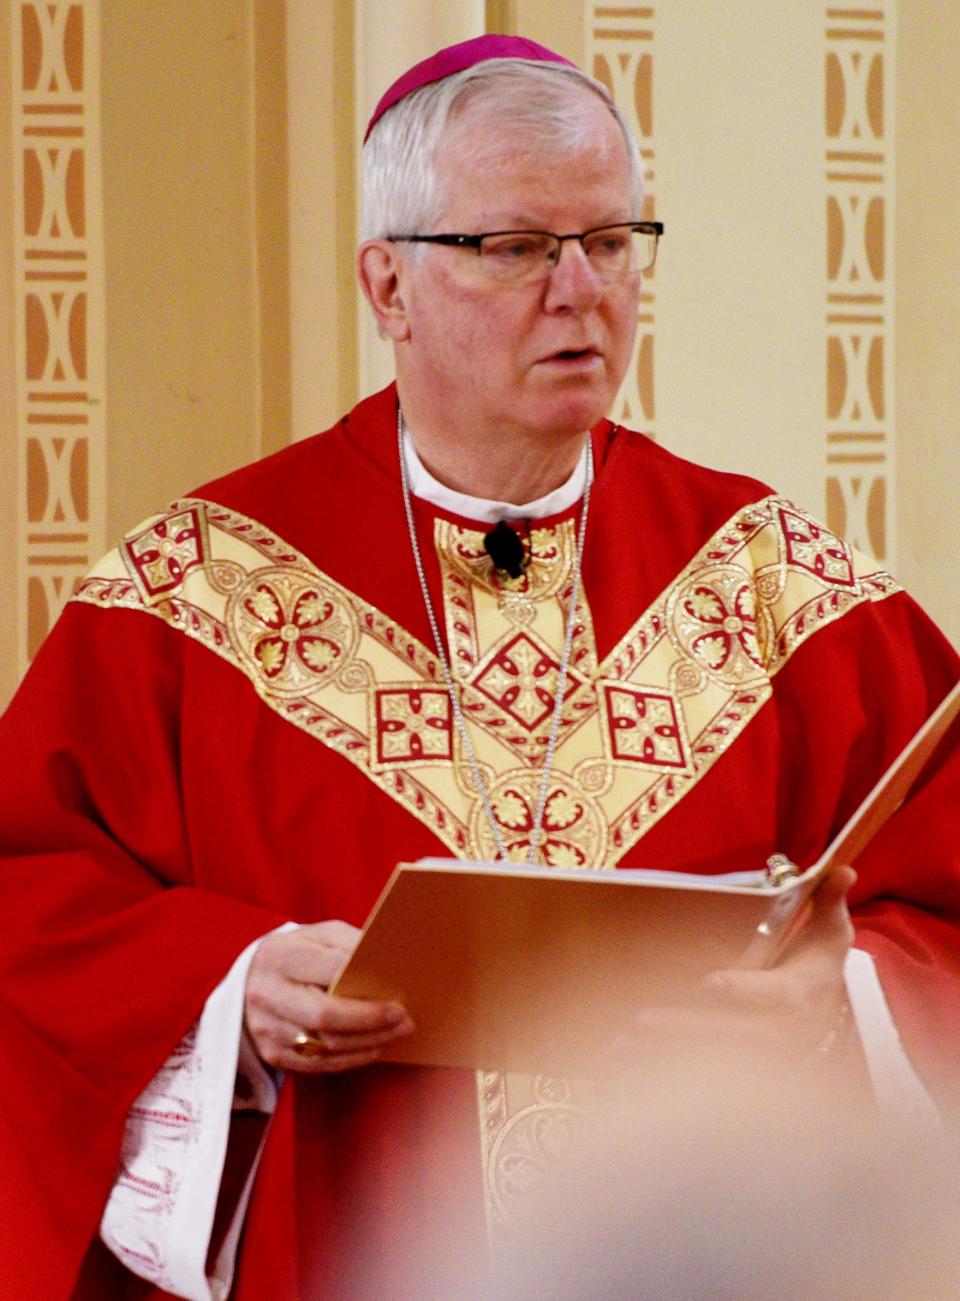 The bishop for the Diocese of Shreveport Francis I. Malone during the 28th annual Red Mass Friday morning, May 6, 2022, at Holy Trinity Catholic Church.